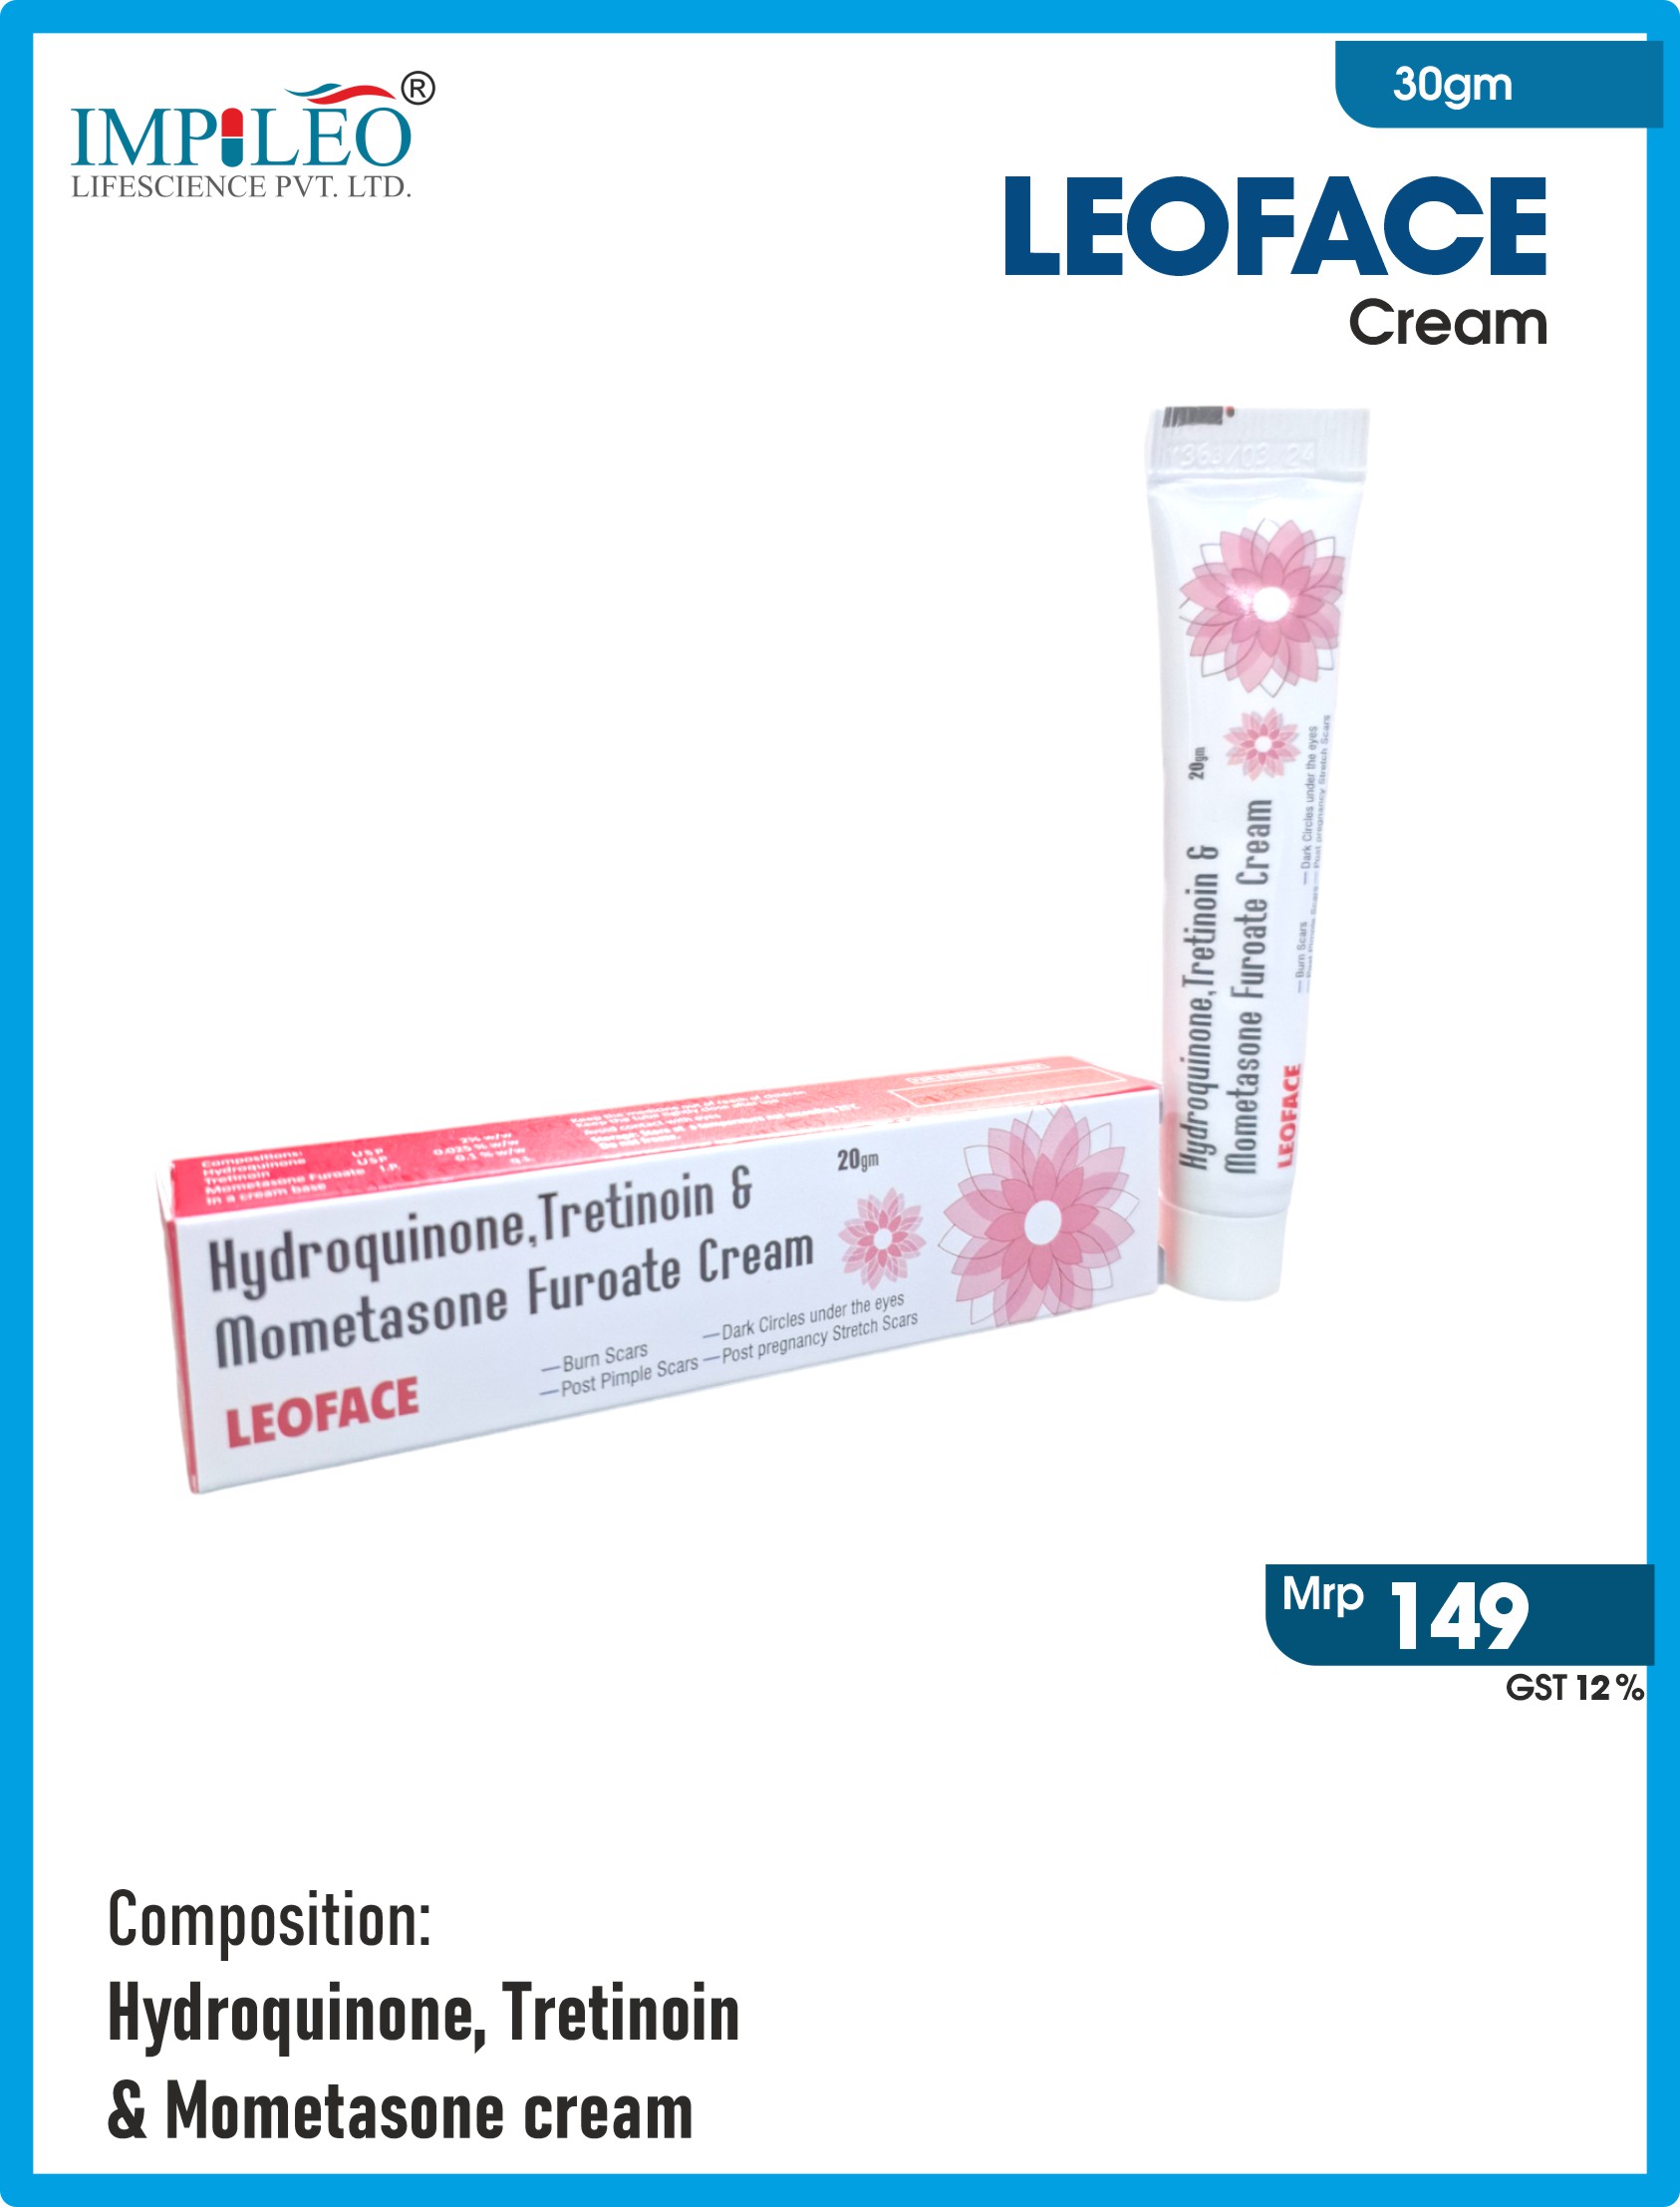 Experience Flawless Skin with LEOFACE Cream from Premier PCD Pharma Franchise in Chandigarh